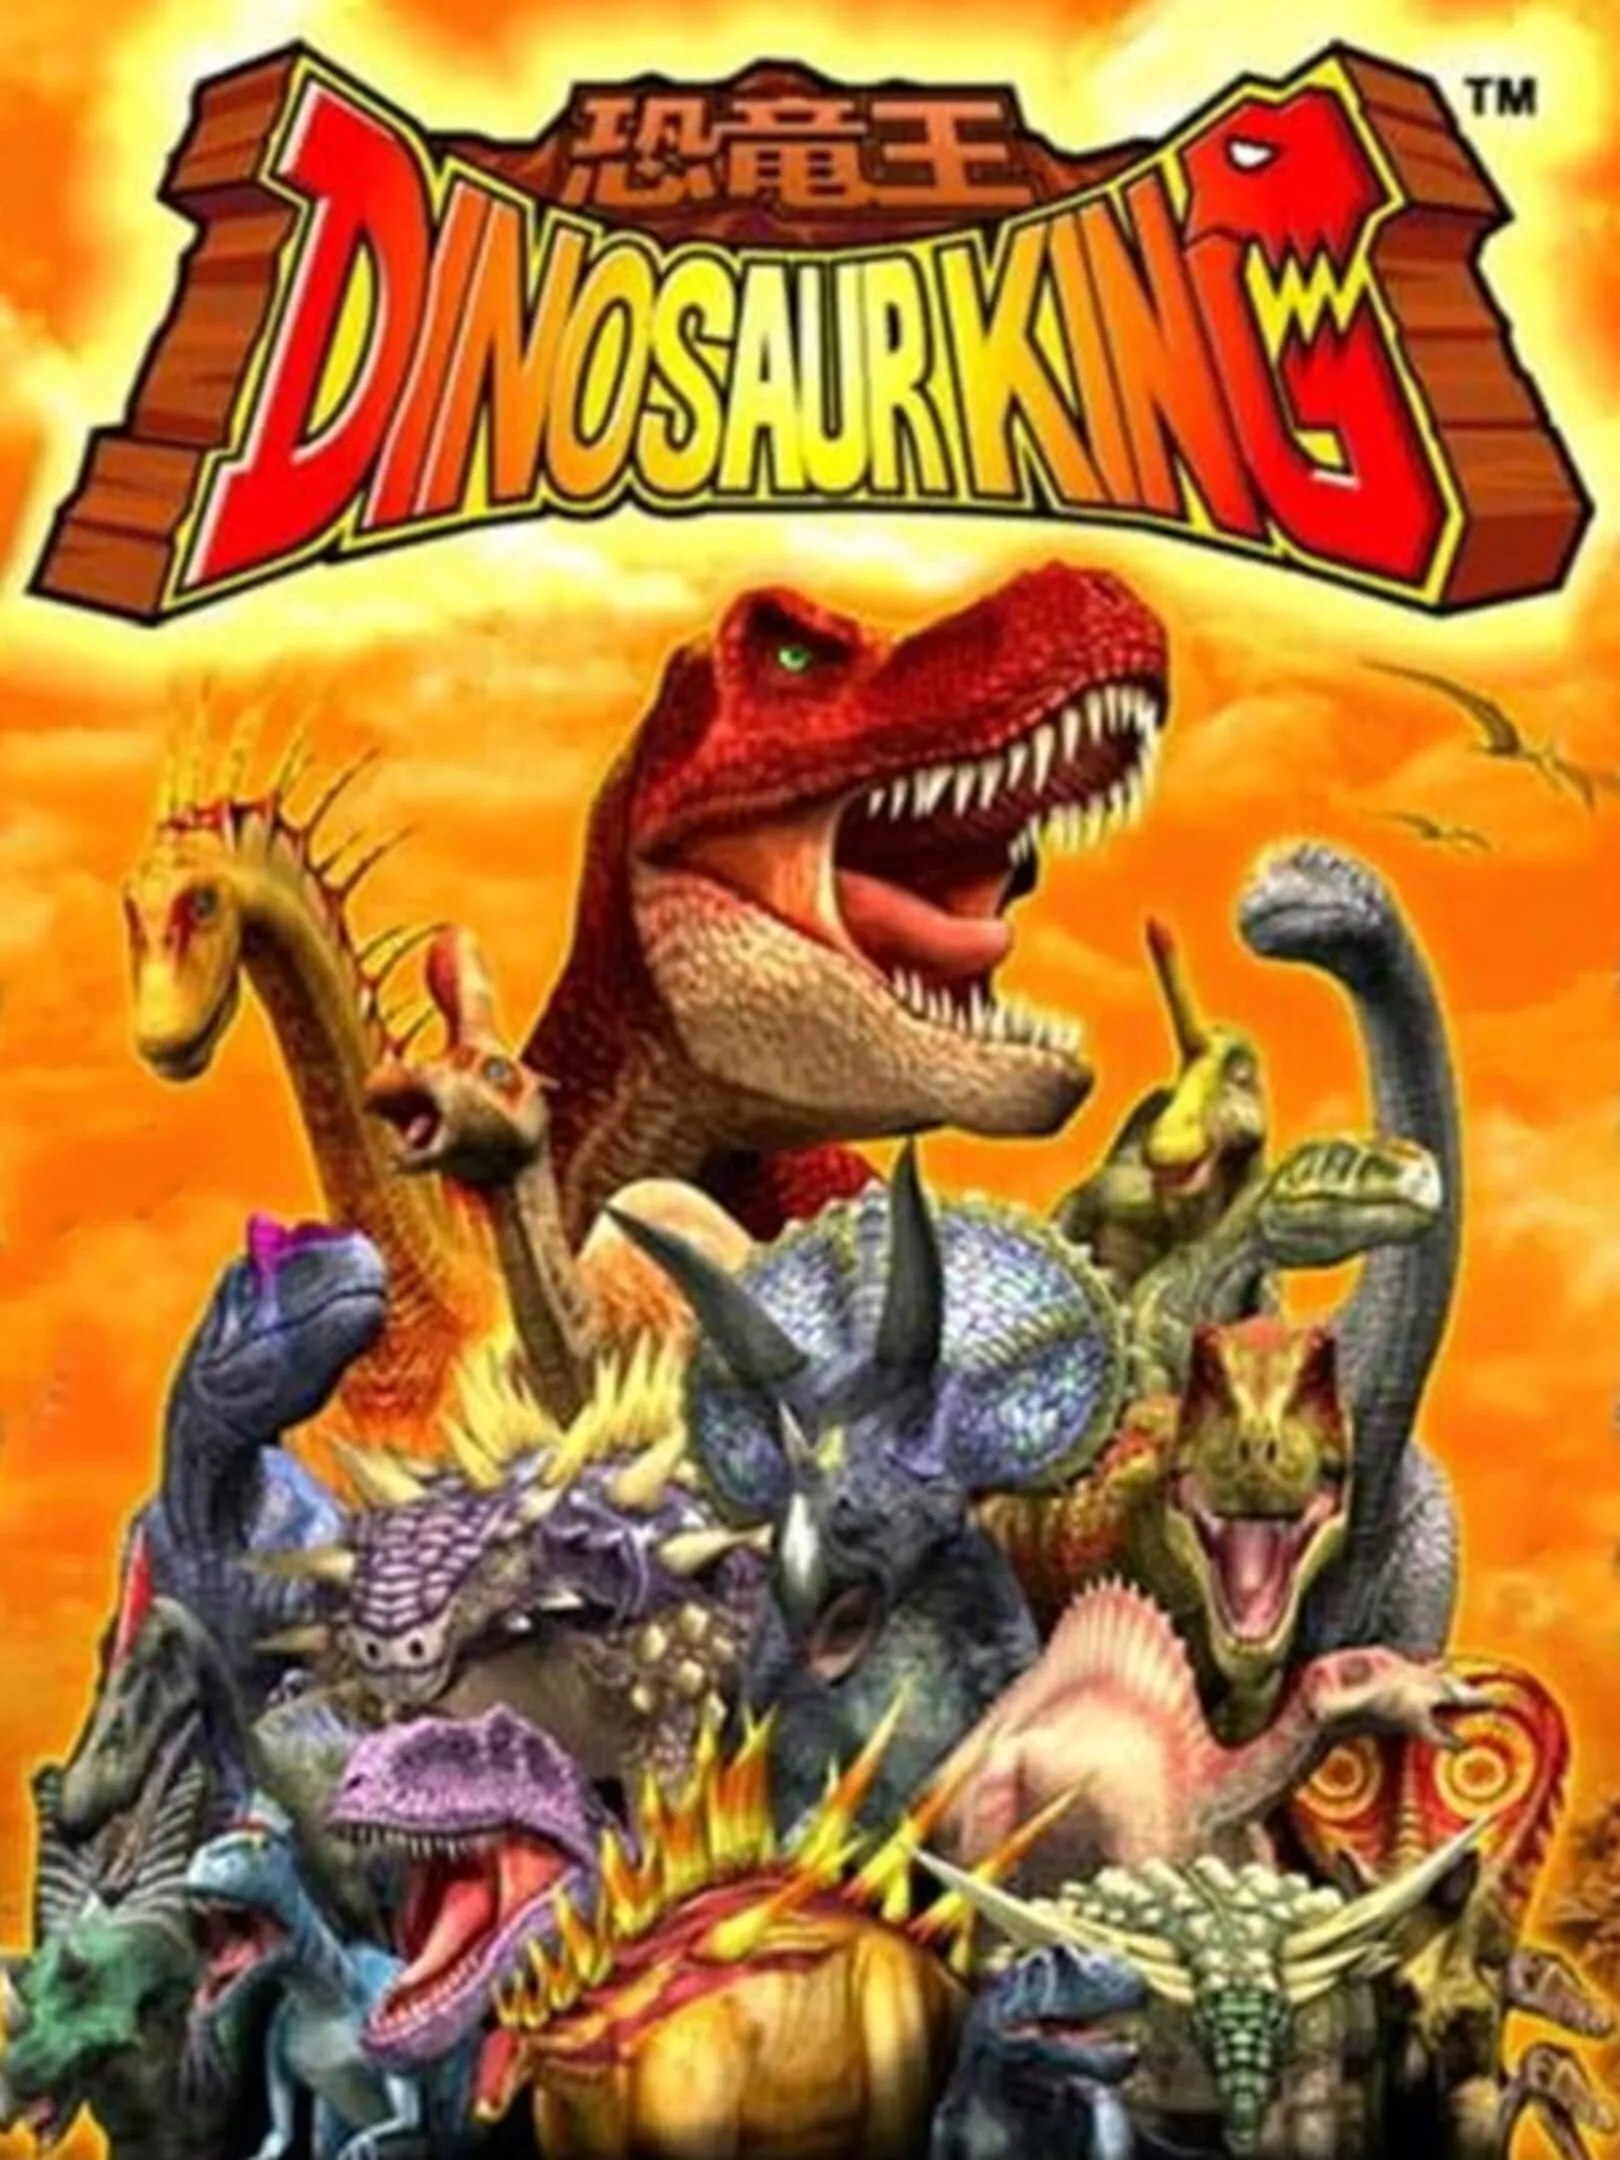 Pin by Samantha Scales on Dino King | Anime, Anime shows, Dinosaur